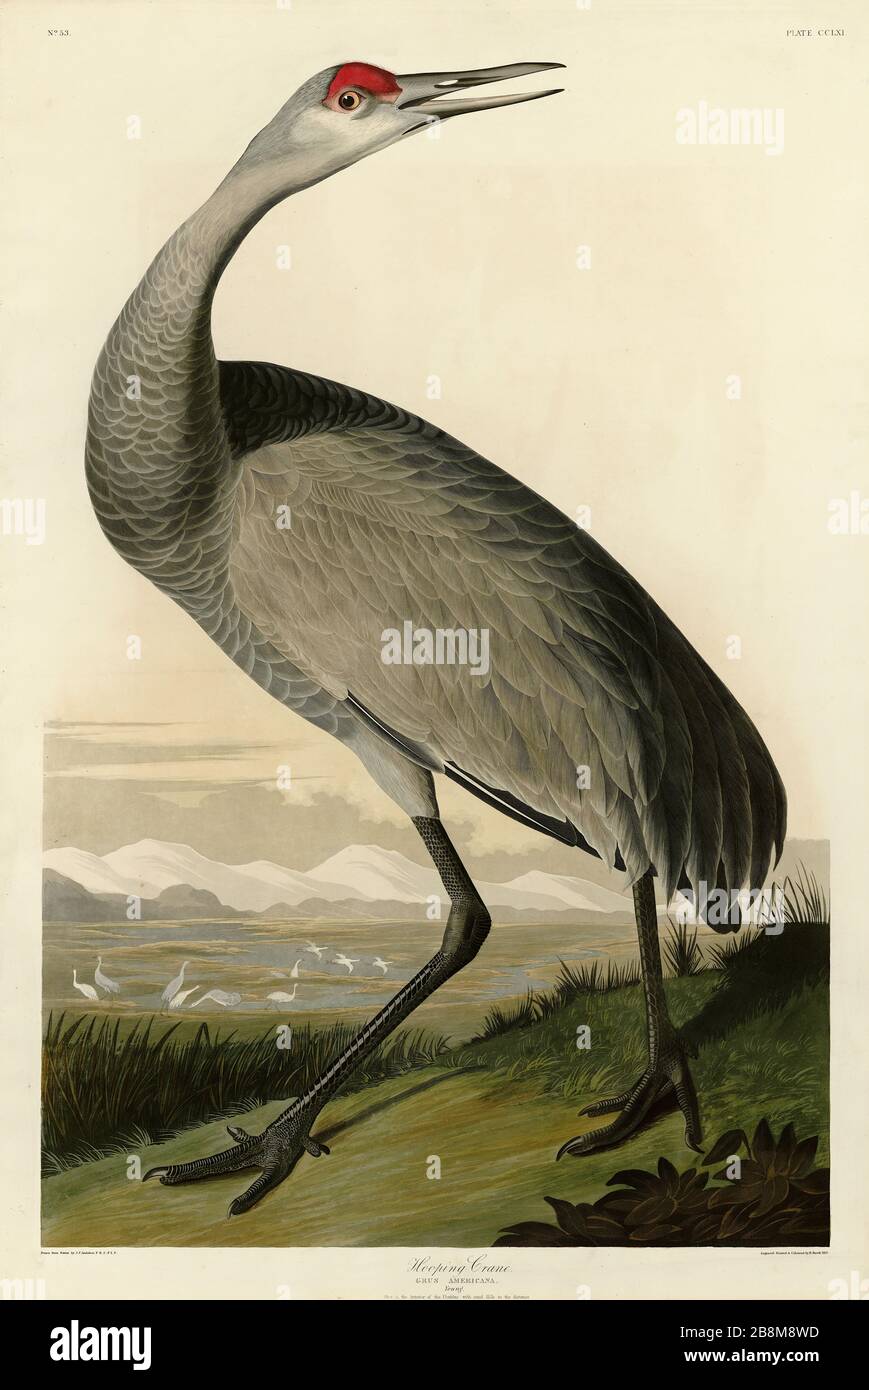 Plate 261 (Whooping) Hooping Crane (Young) from The Birds of America folio (1827–1839) John James Audubon - Very high resolution quality edited image Stock Photo